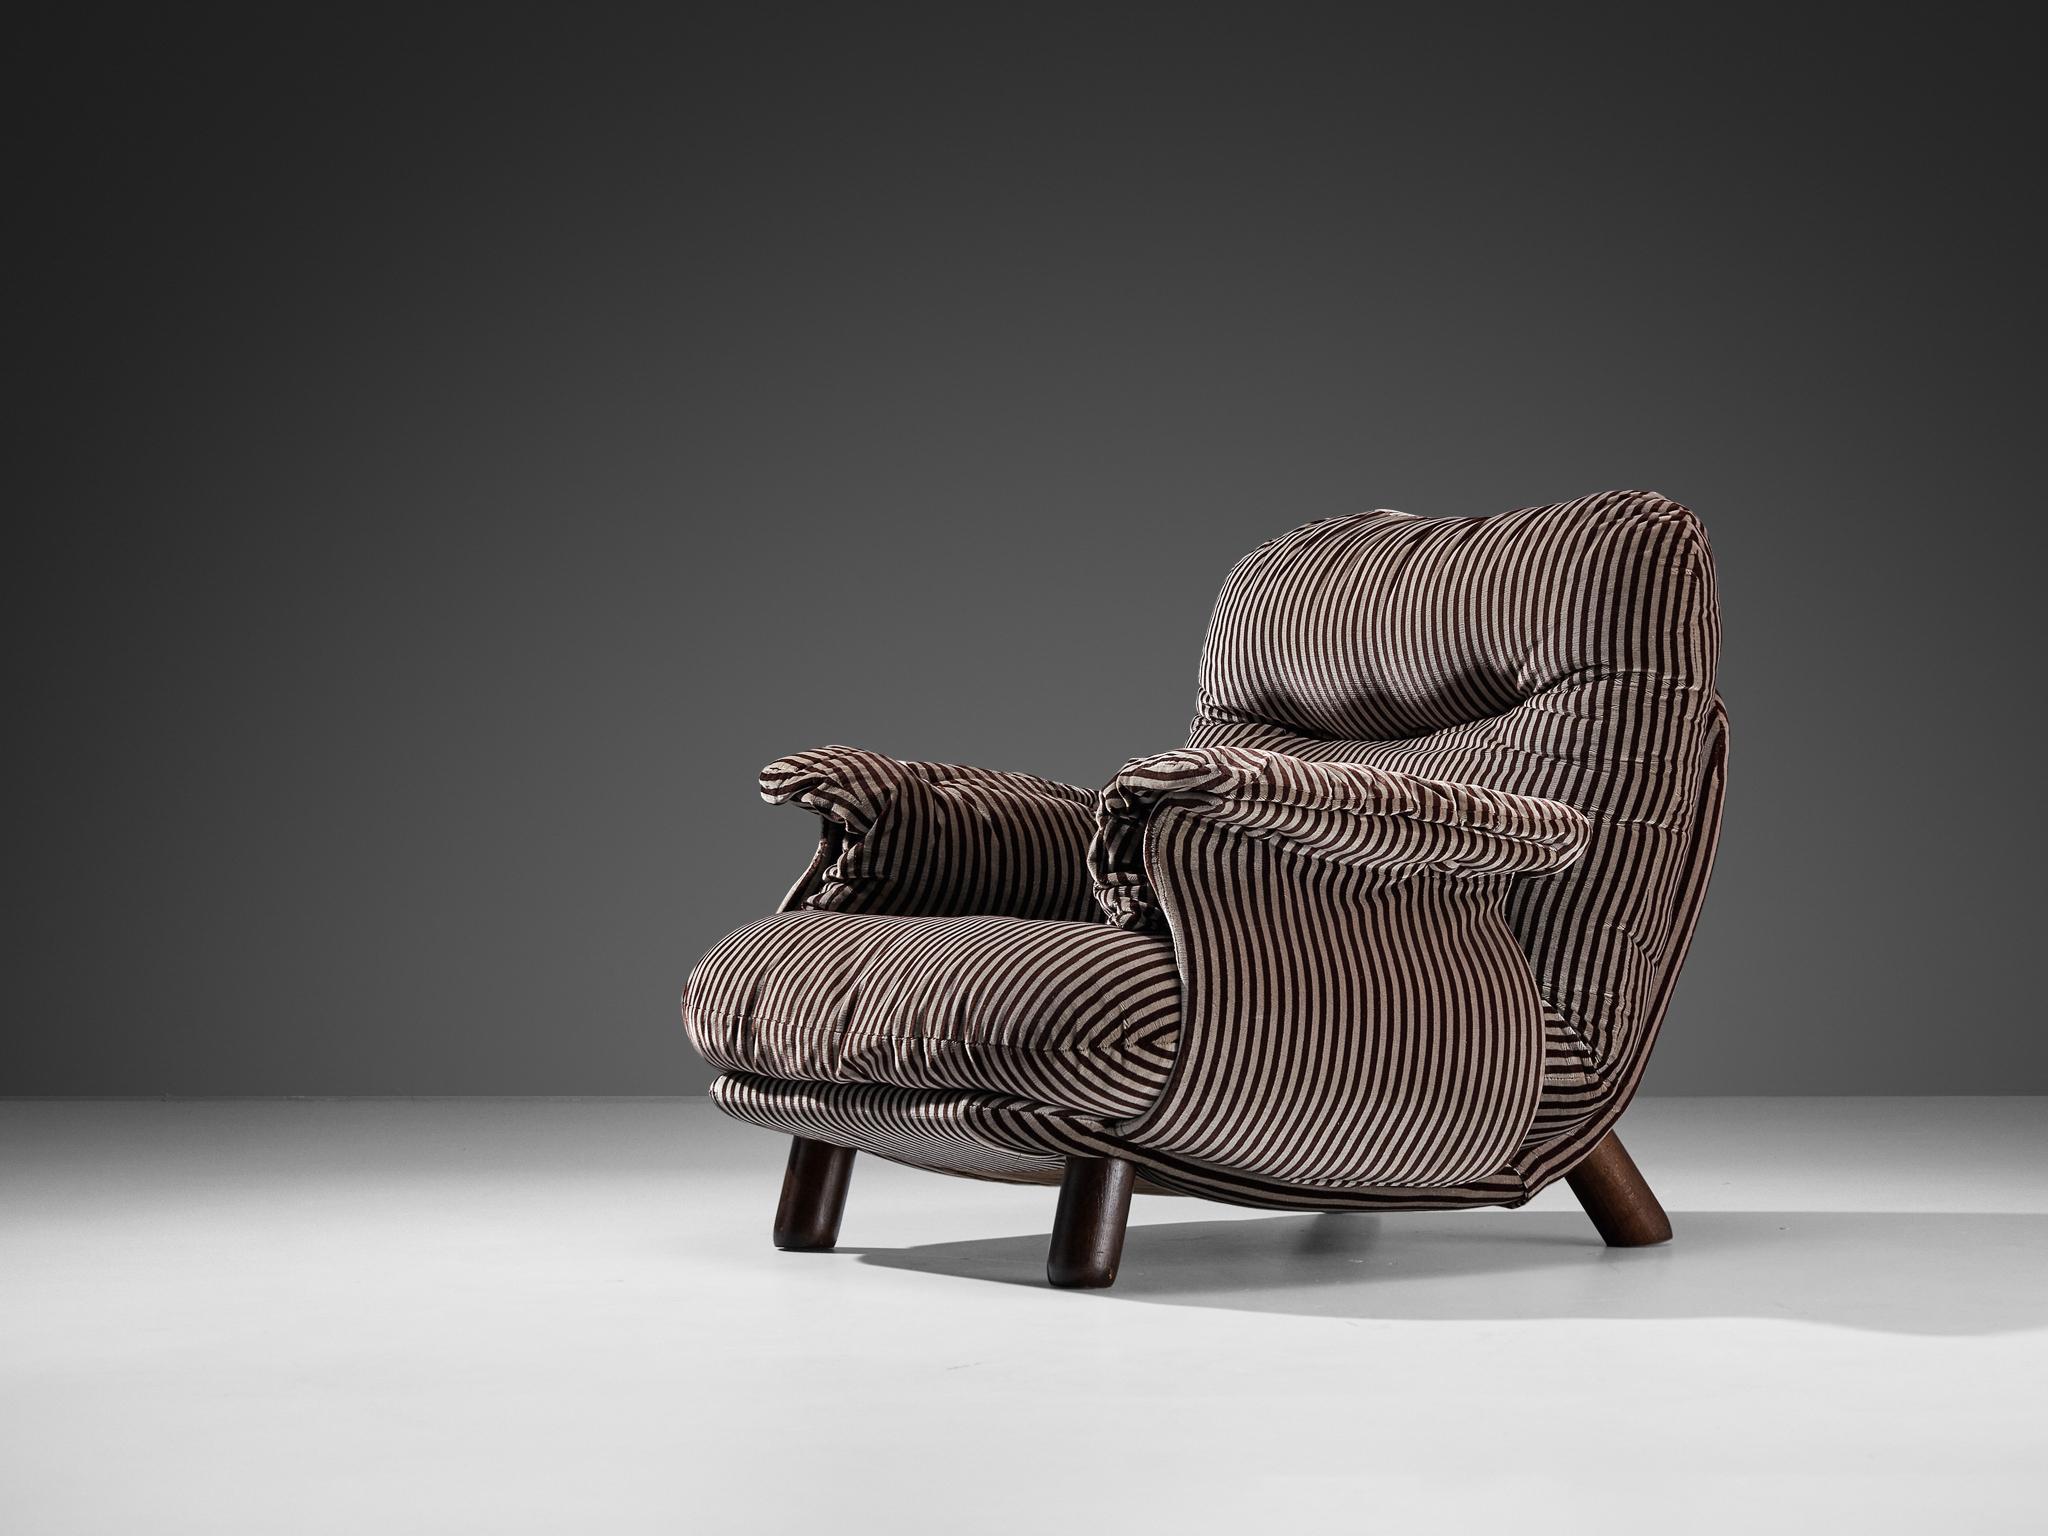 E. Cobianchi for Insa, lounge chair, fabric, stained wood, Italy, 1970s

An Italian bulky easy chair designed by E. Cobianchi. The lounge chair features a thick, tufted seat and backrest. The armrests are curved in an extravagant way, giving the